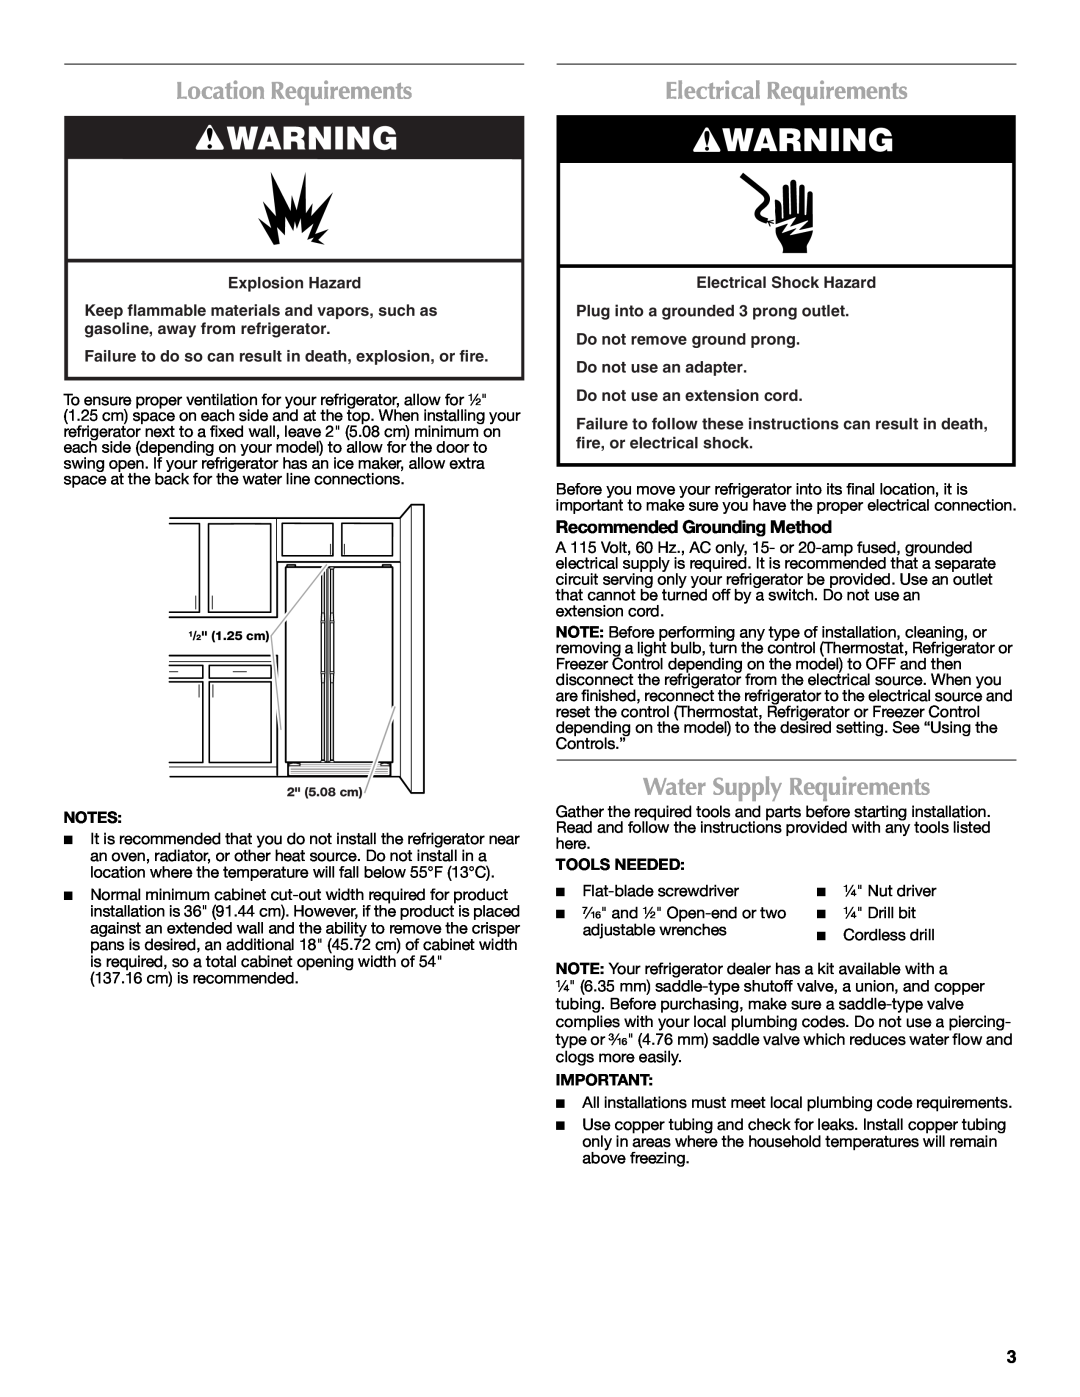 Maytag W10237808A Location Requirements, Electrical Requirements, Water Supply Requirements, Recommended Grounding Method 